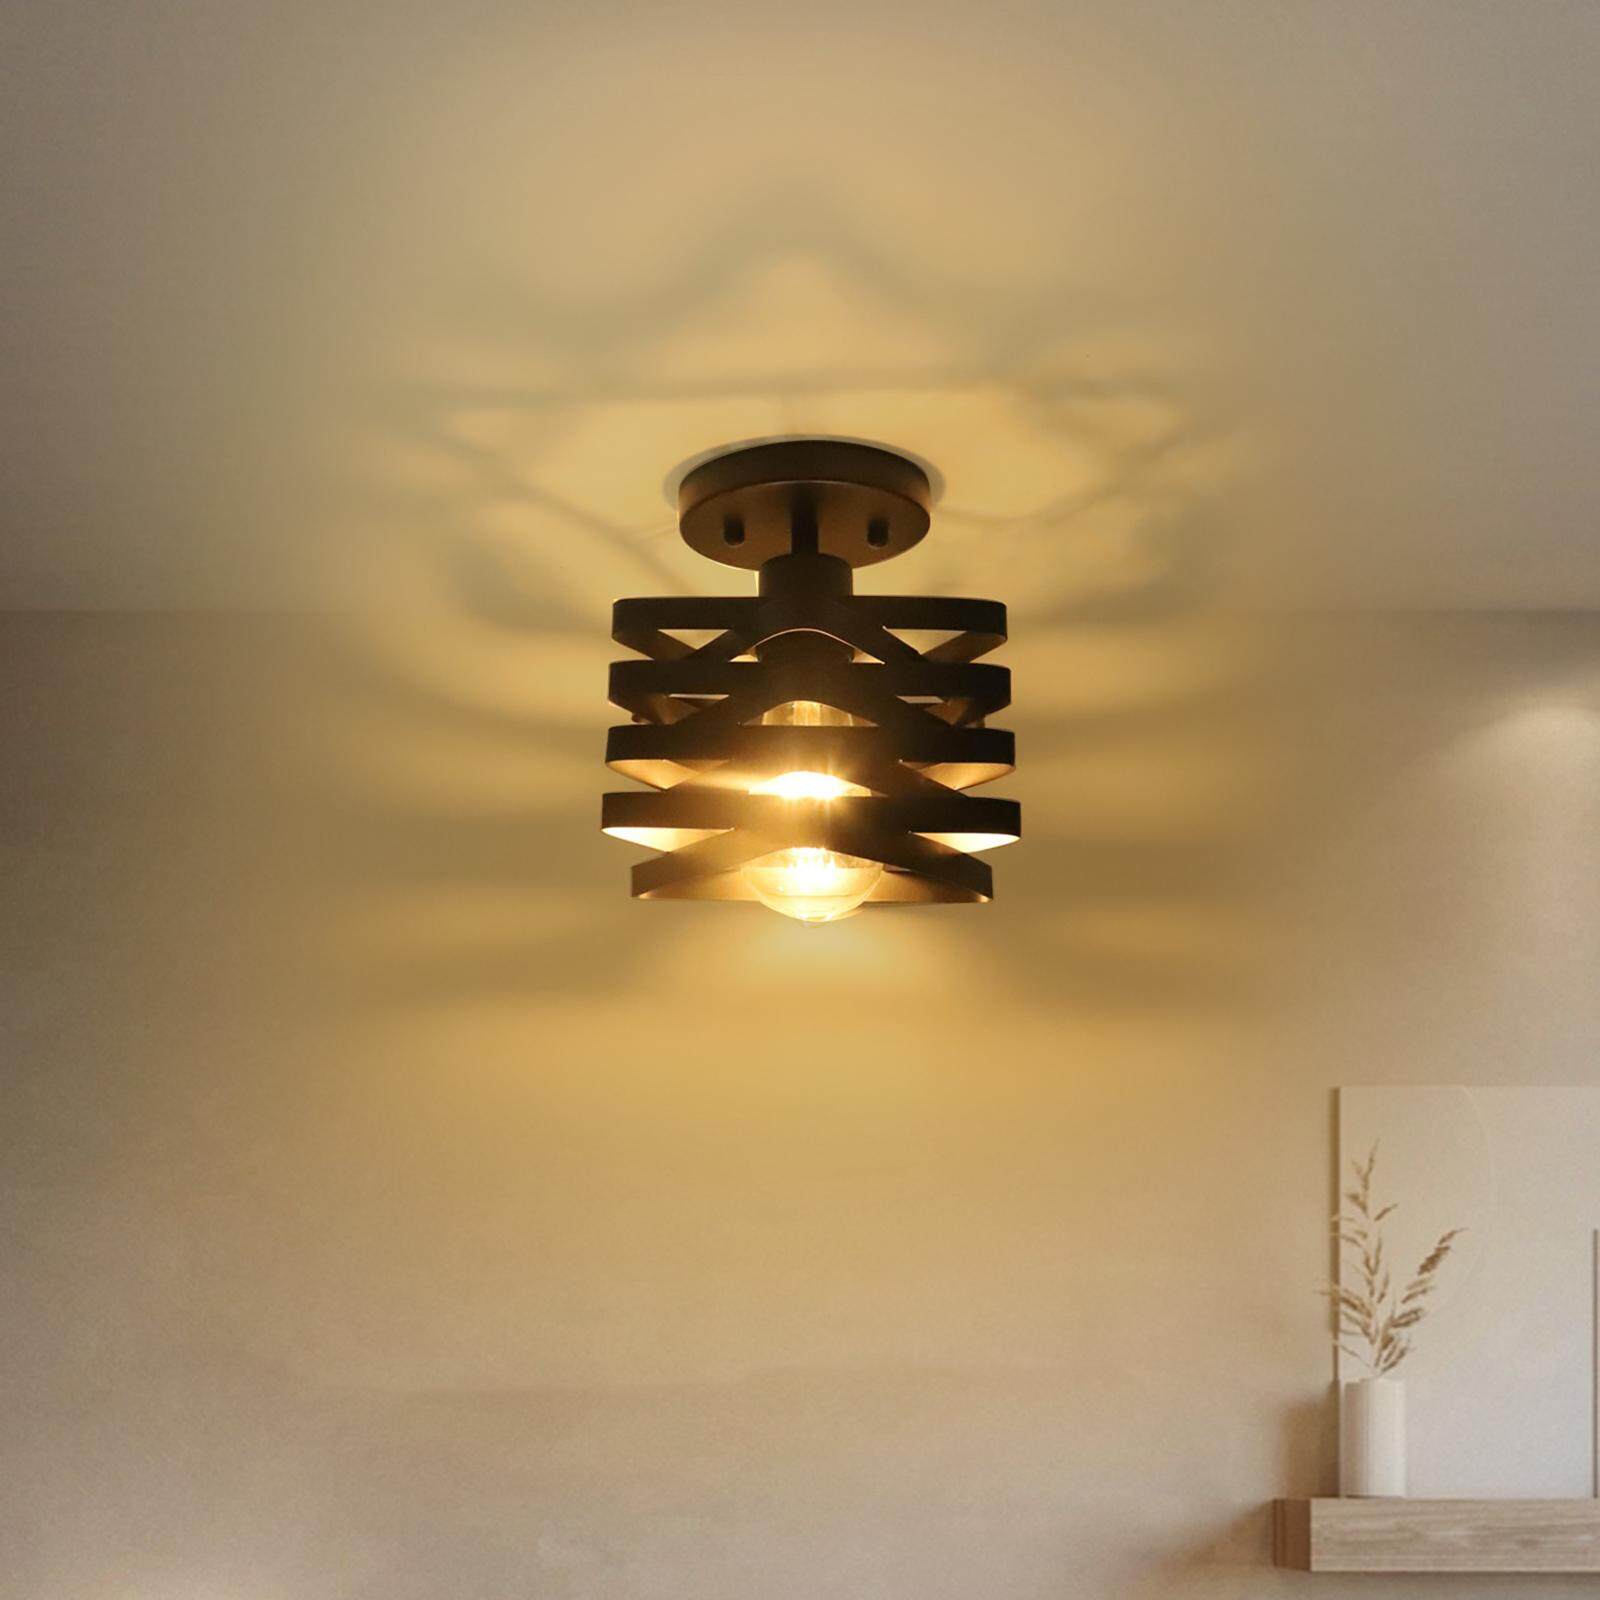 LED Ceiling Lamp Shades Laundry Tea Room Decorative Light Fixture Ornament Kitchen Island Hotel Light Cover Chandelier Lampshade